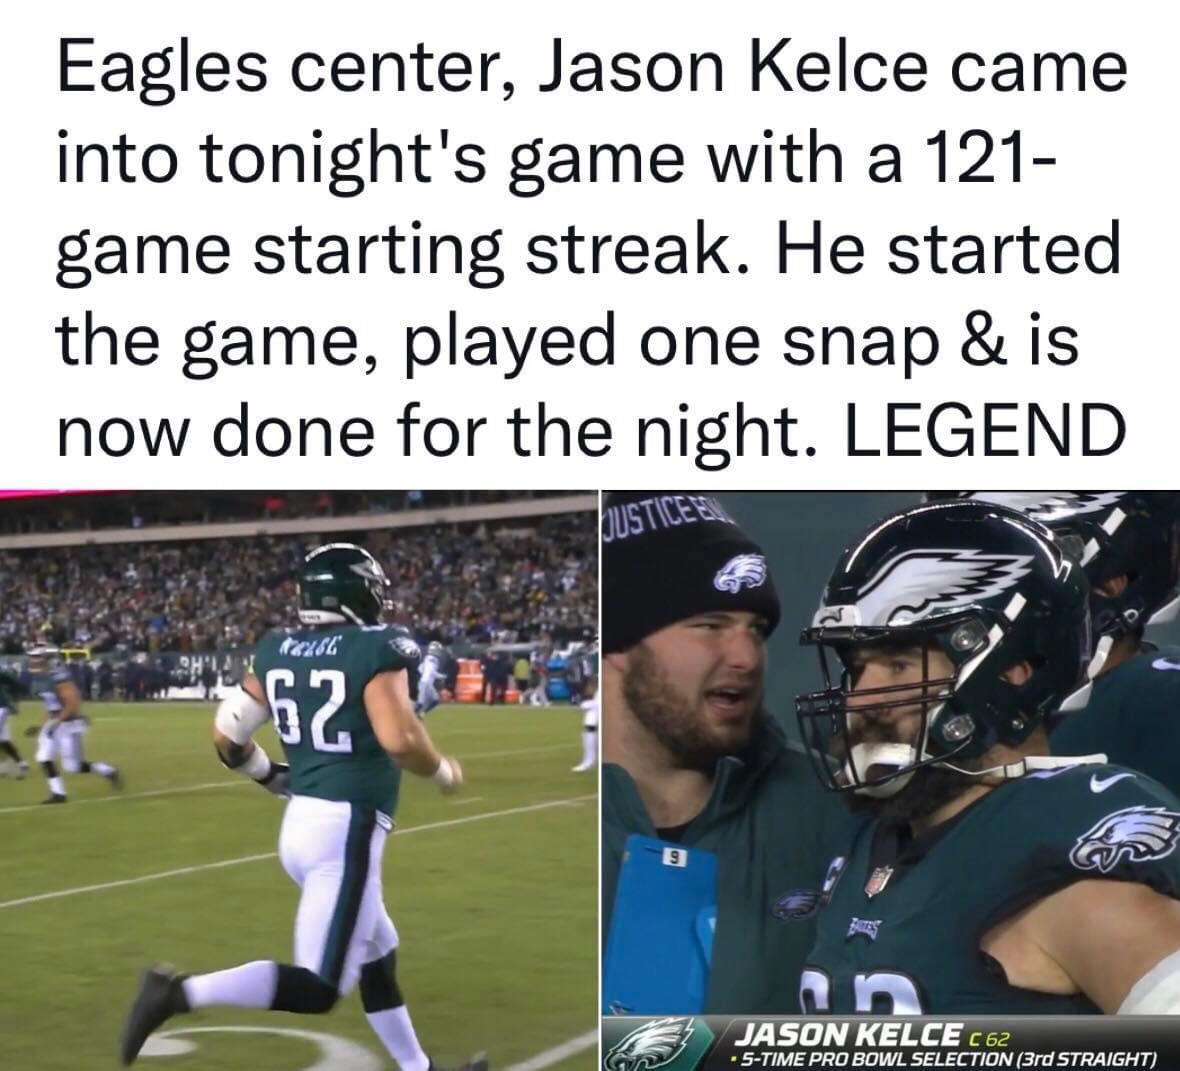 Jason Kelce played one snap and is done meme